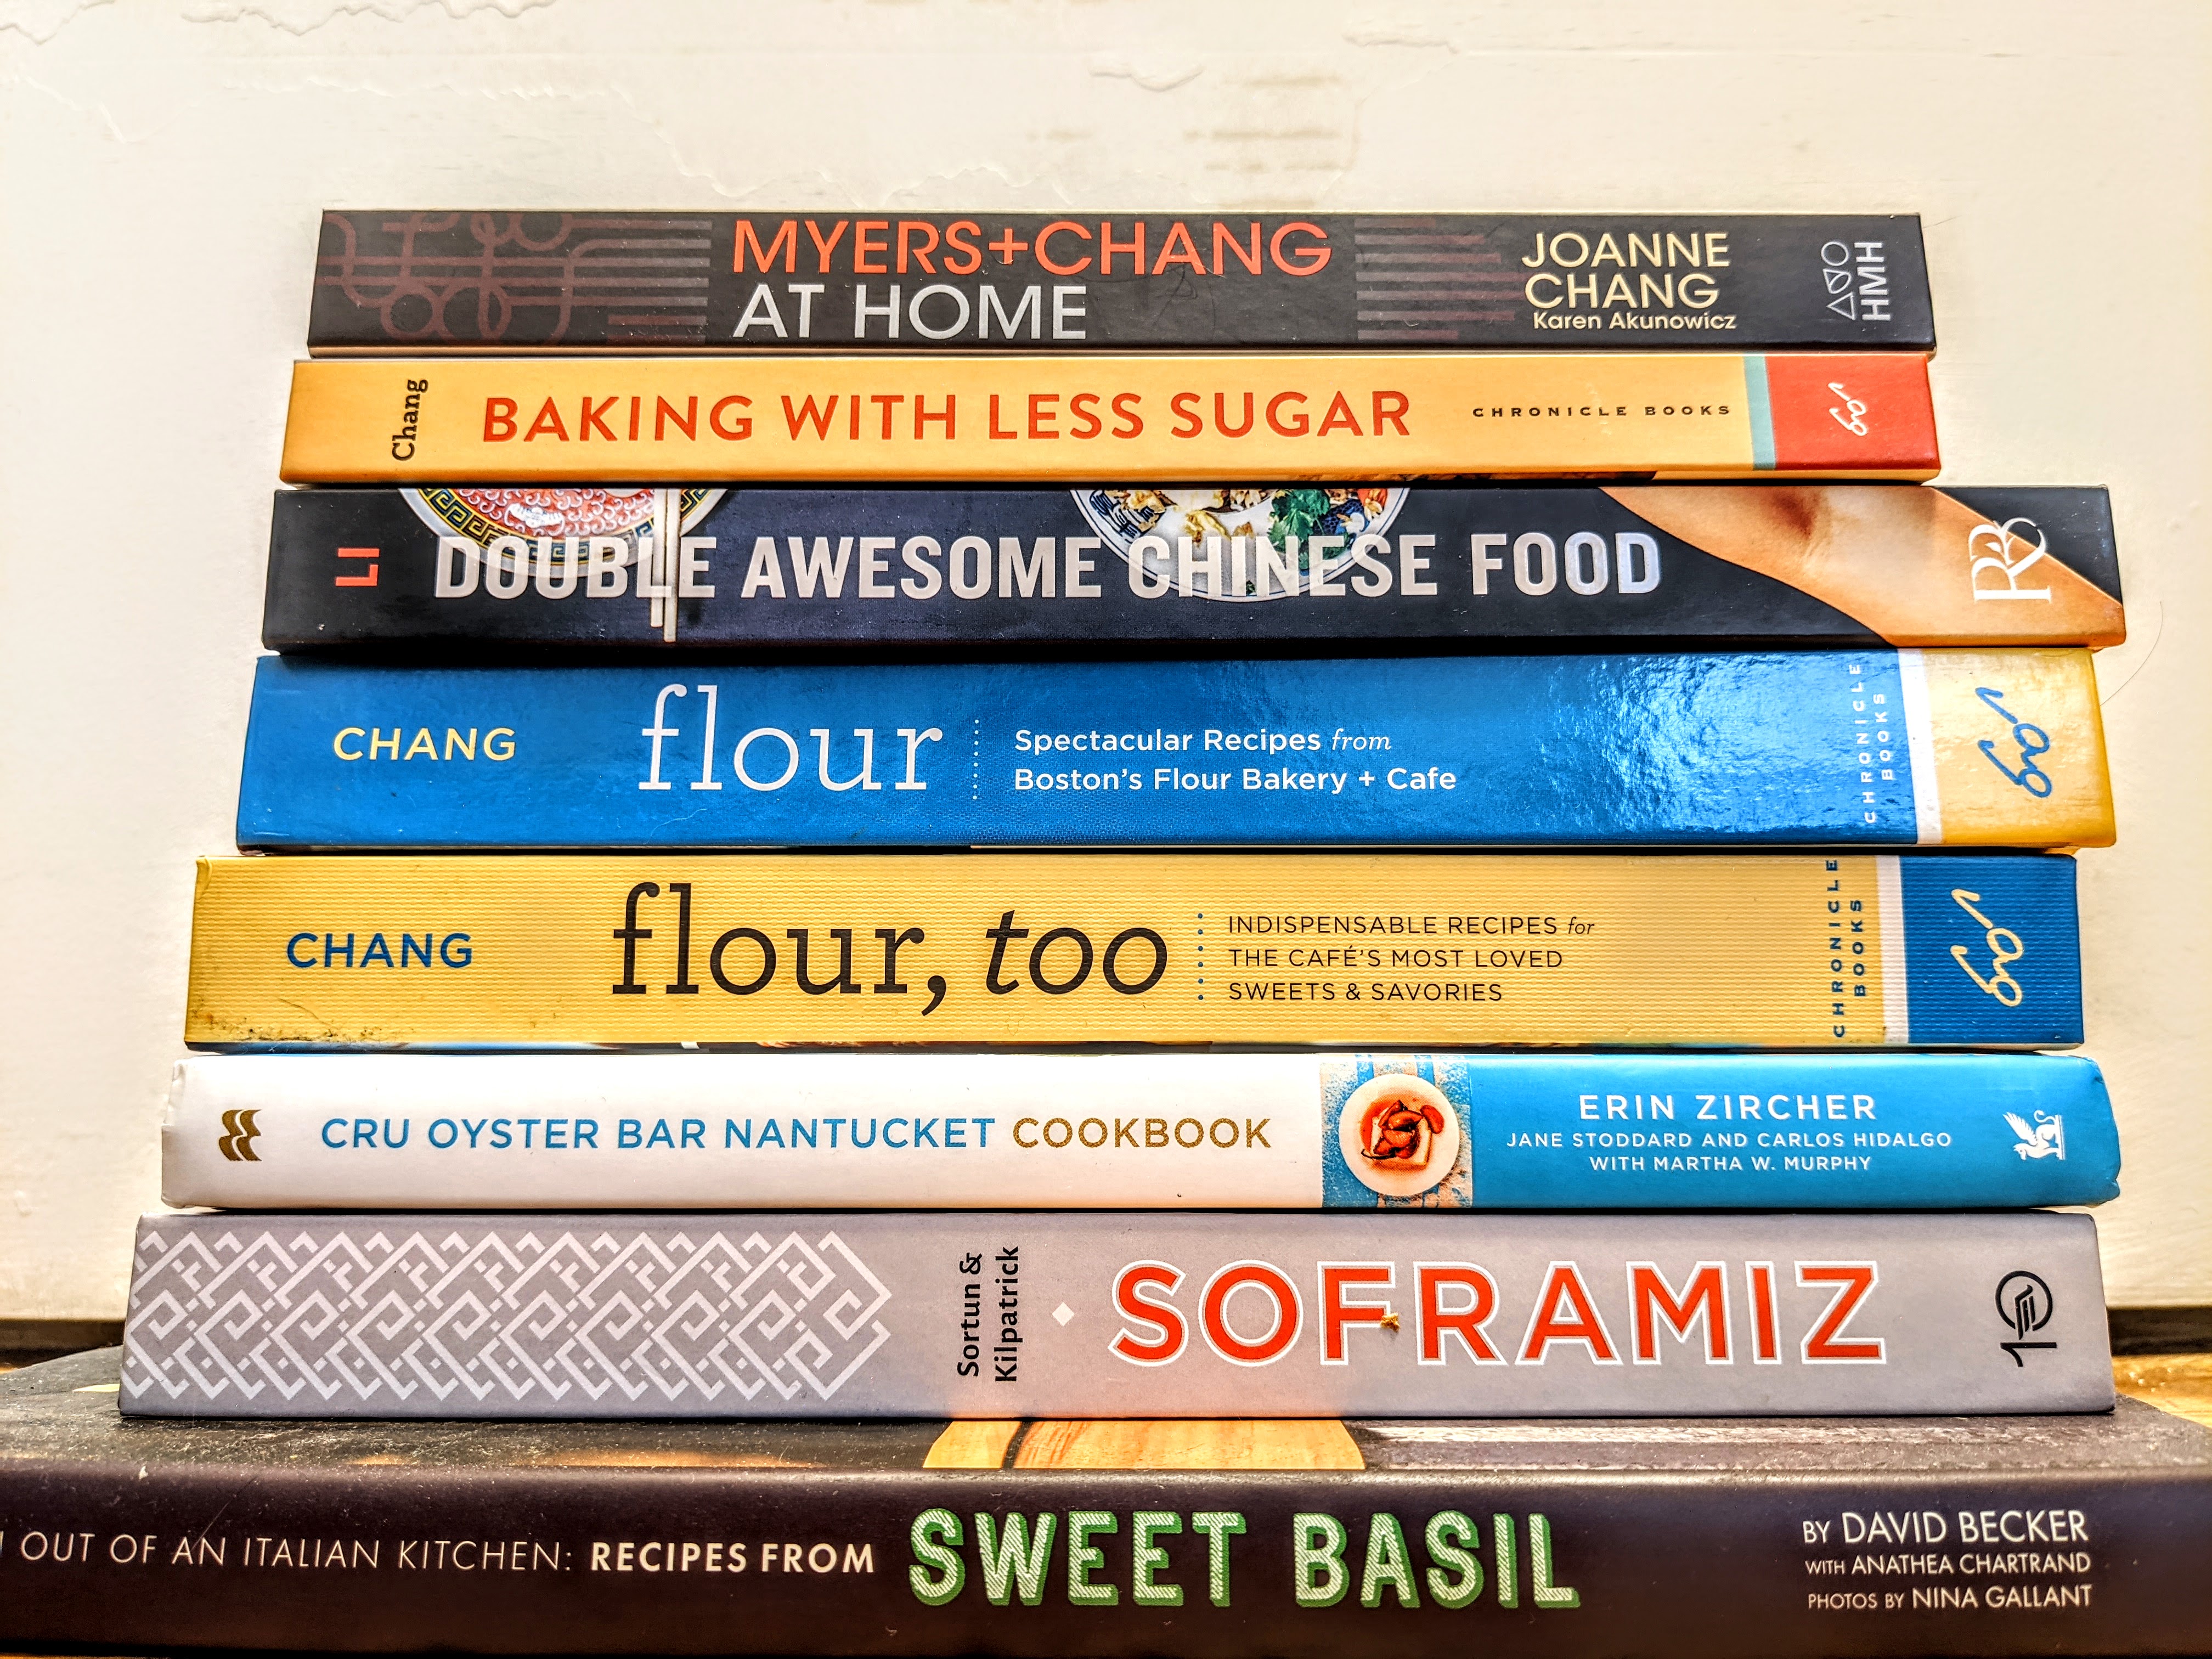 A stack of eight cookbooks, spines facing the camera, with titles including Sweet Basil, Soframiz, Double Awesome Chinese Food, and more.